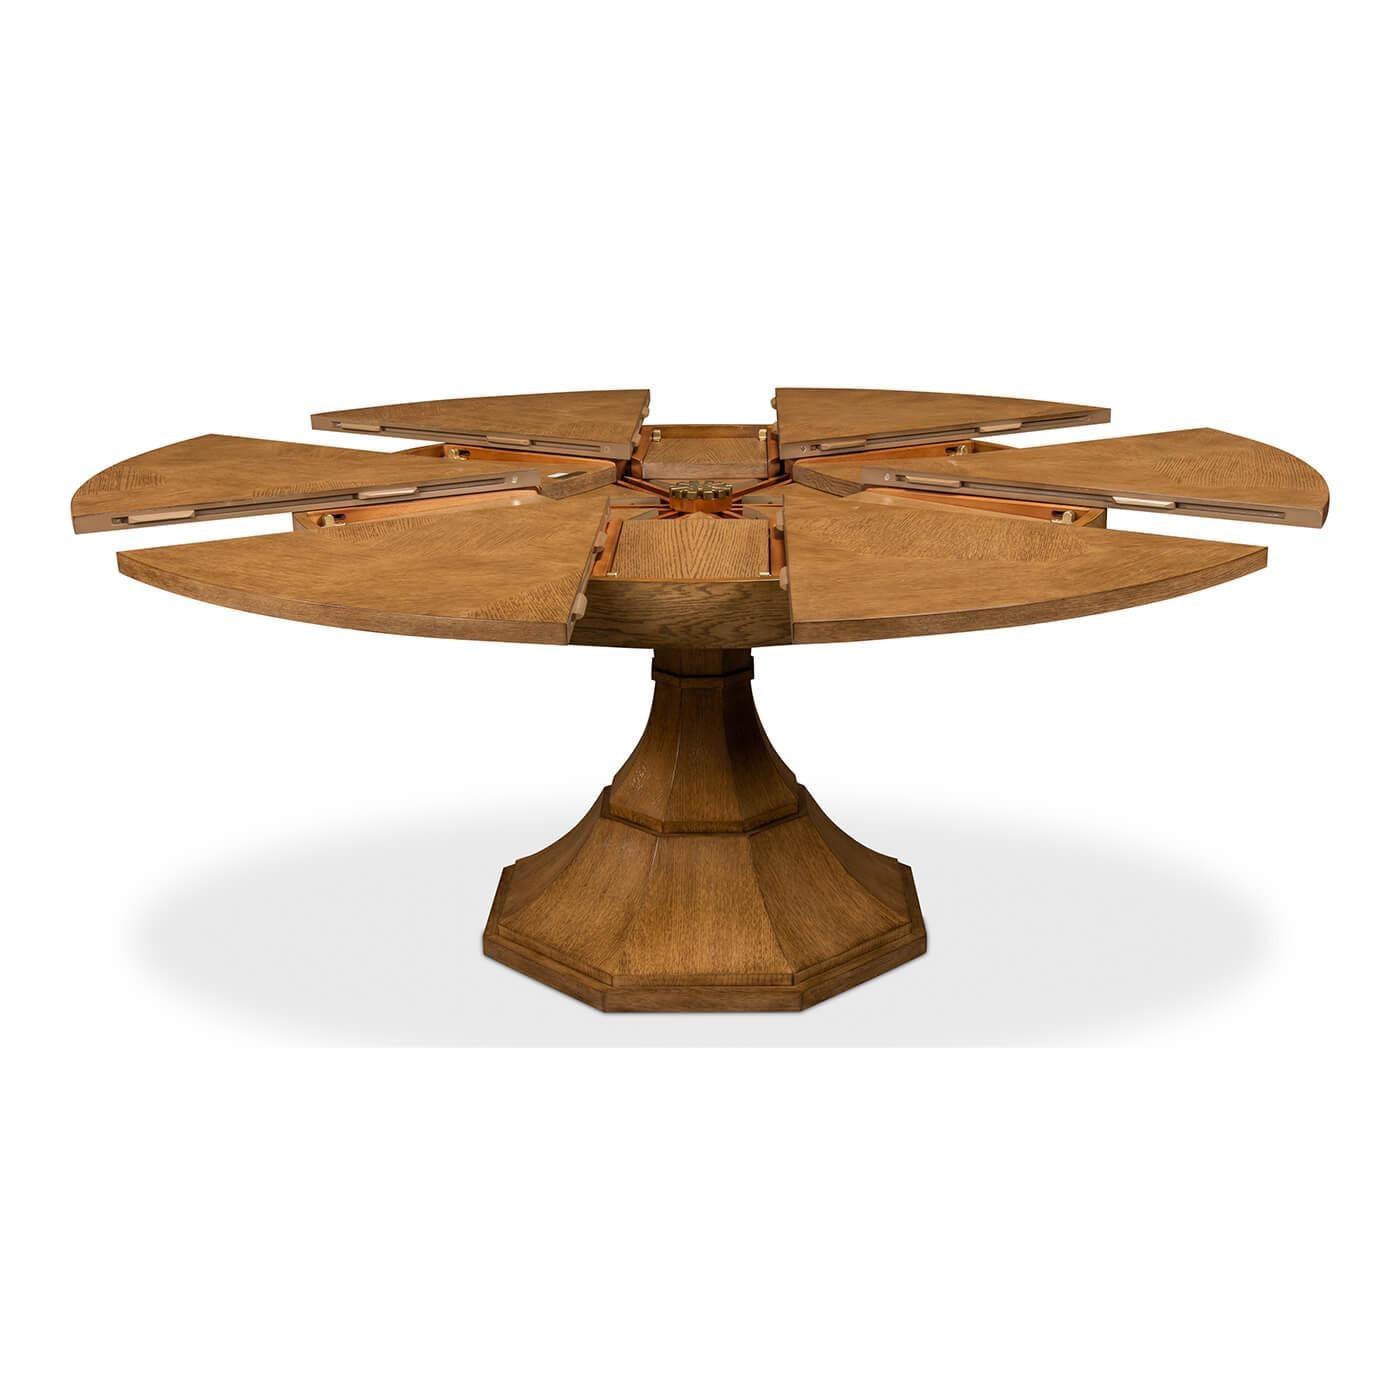 Modern round dining table modern round oak and oak veneered extension dining table with self-storing leaves, on a tapered column form pedestal base.

Open dimensions: 70